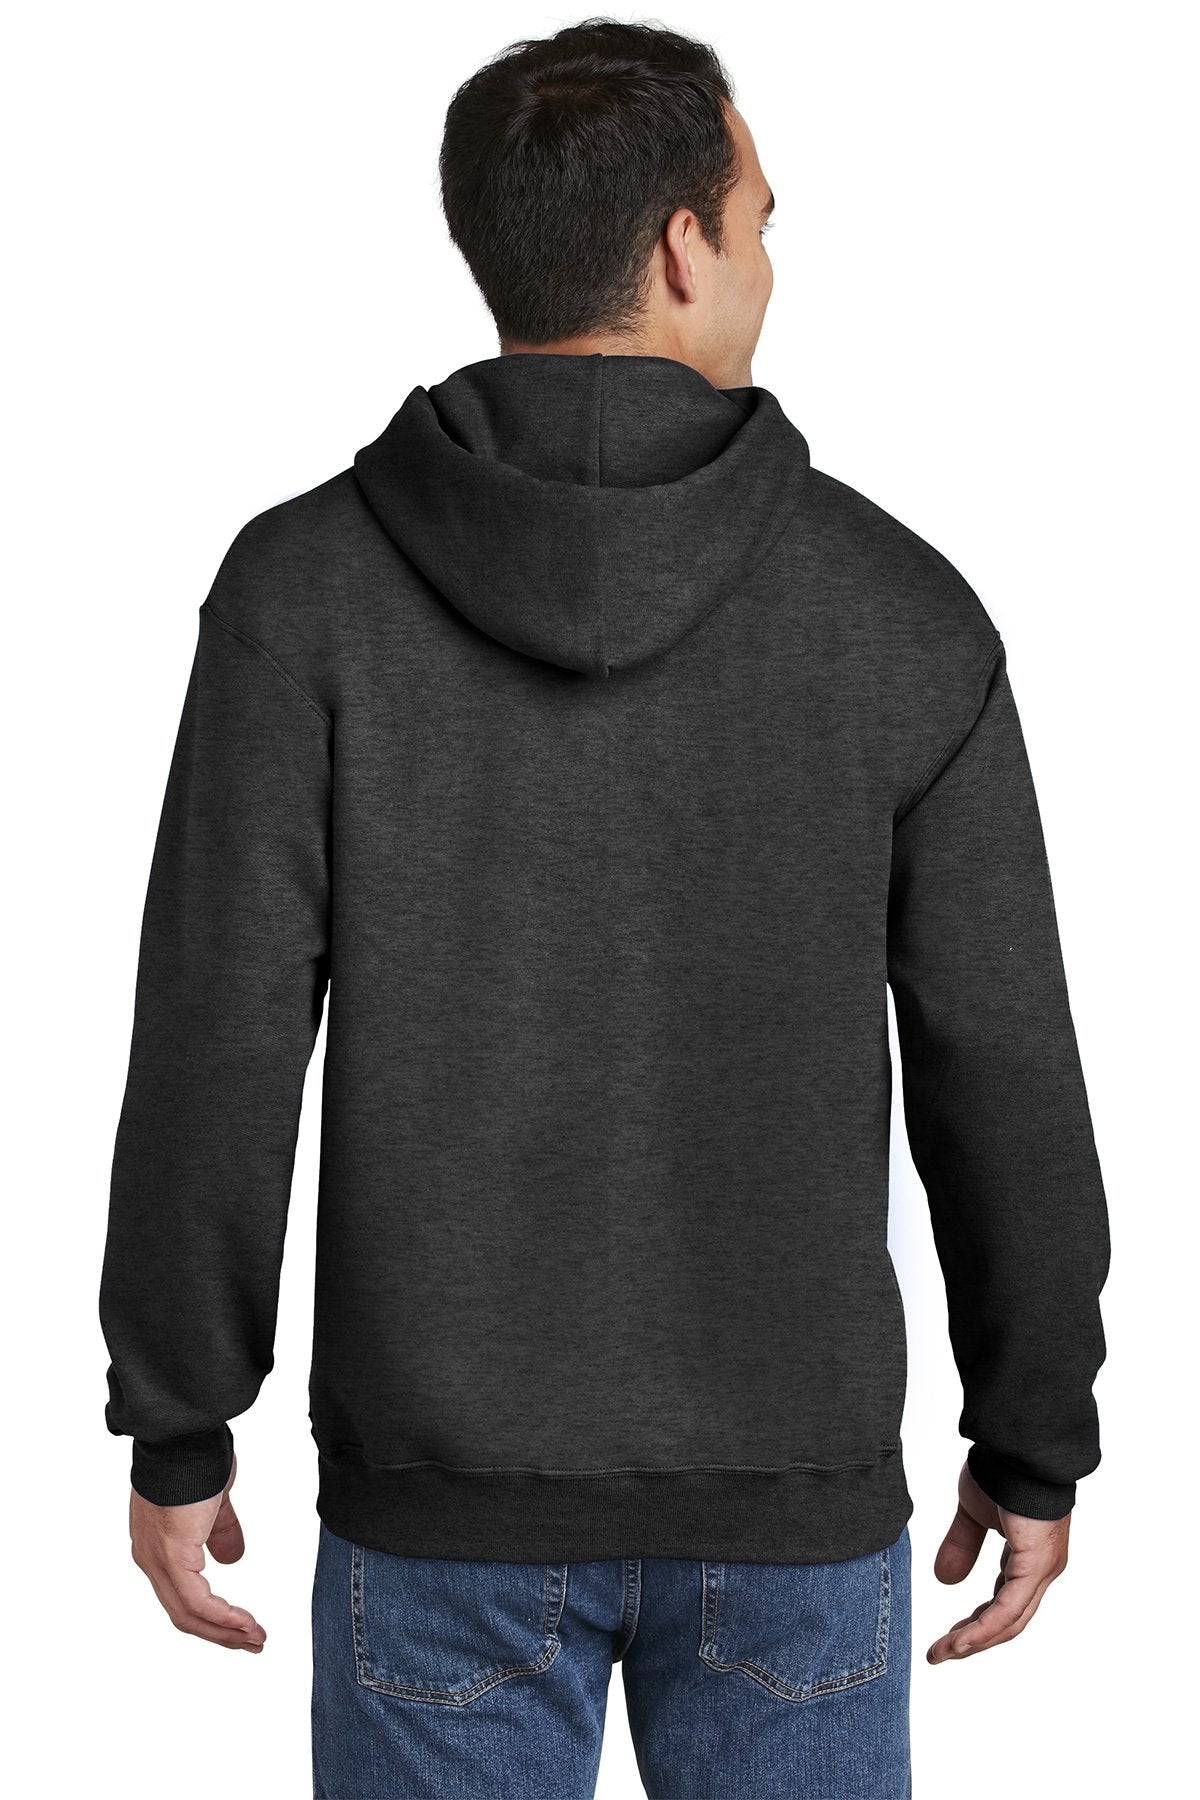 Hanes Ultimate Cotton Pullover Hooded Sweatshirt F170 Charcoal Heather